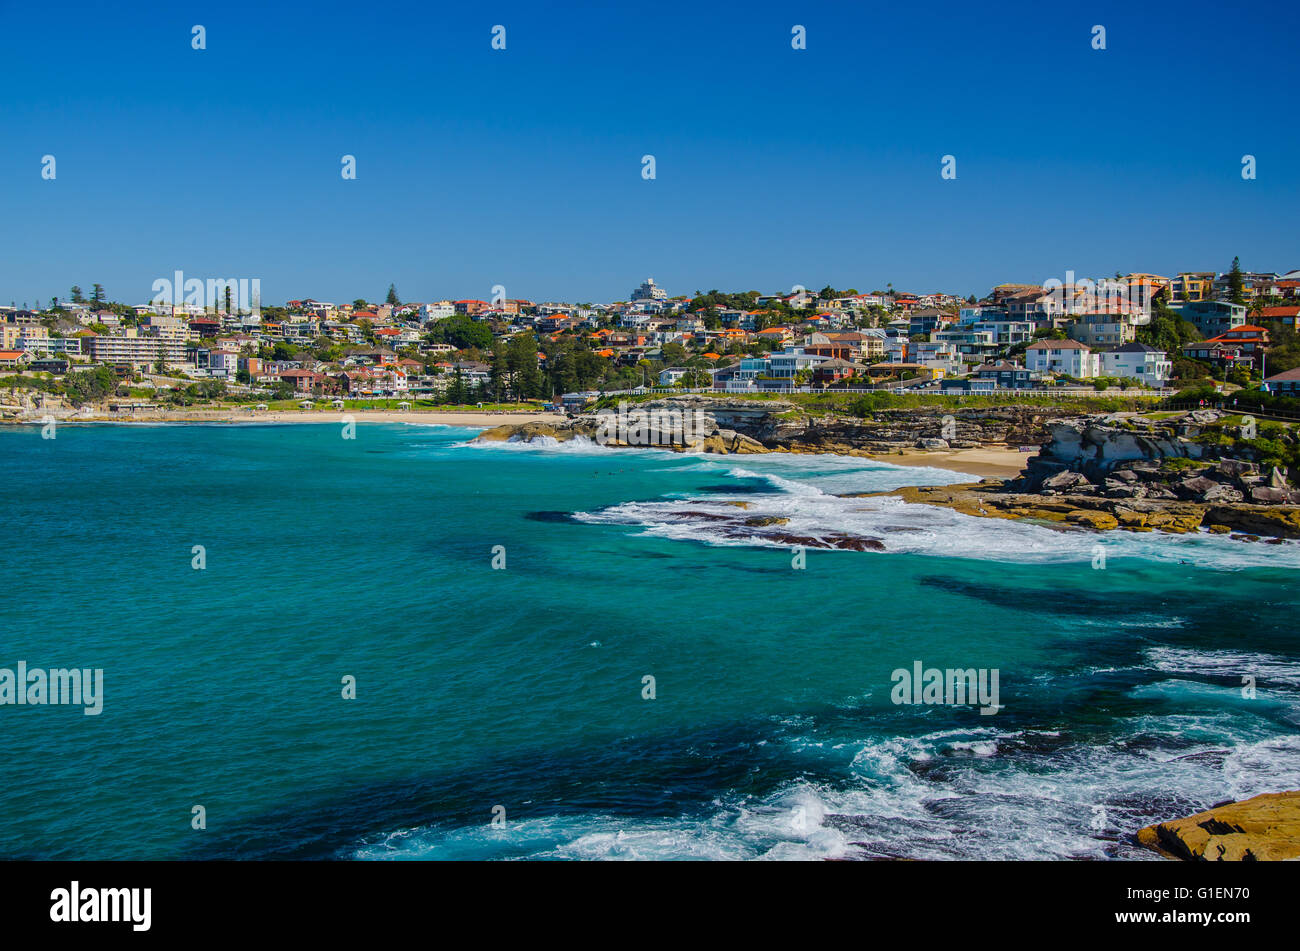 From Bondi to Coogee along the coast. Stock Photo